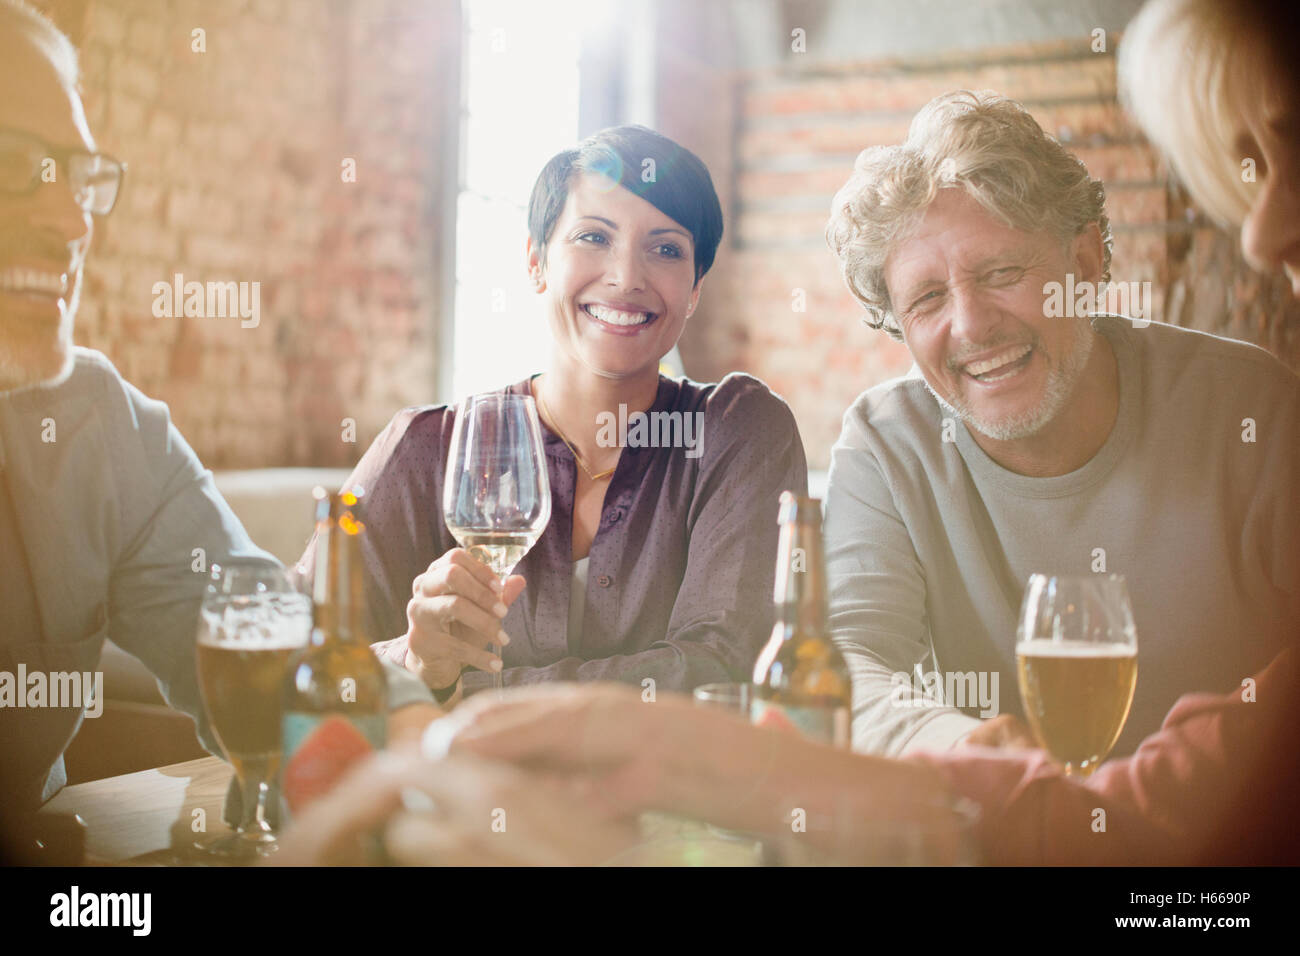 Laughing couples drinking white wine and beer at restaurant table Stock Photo